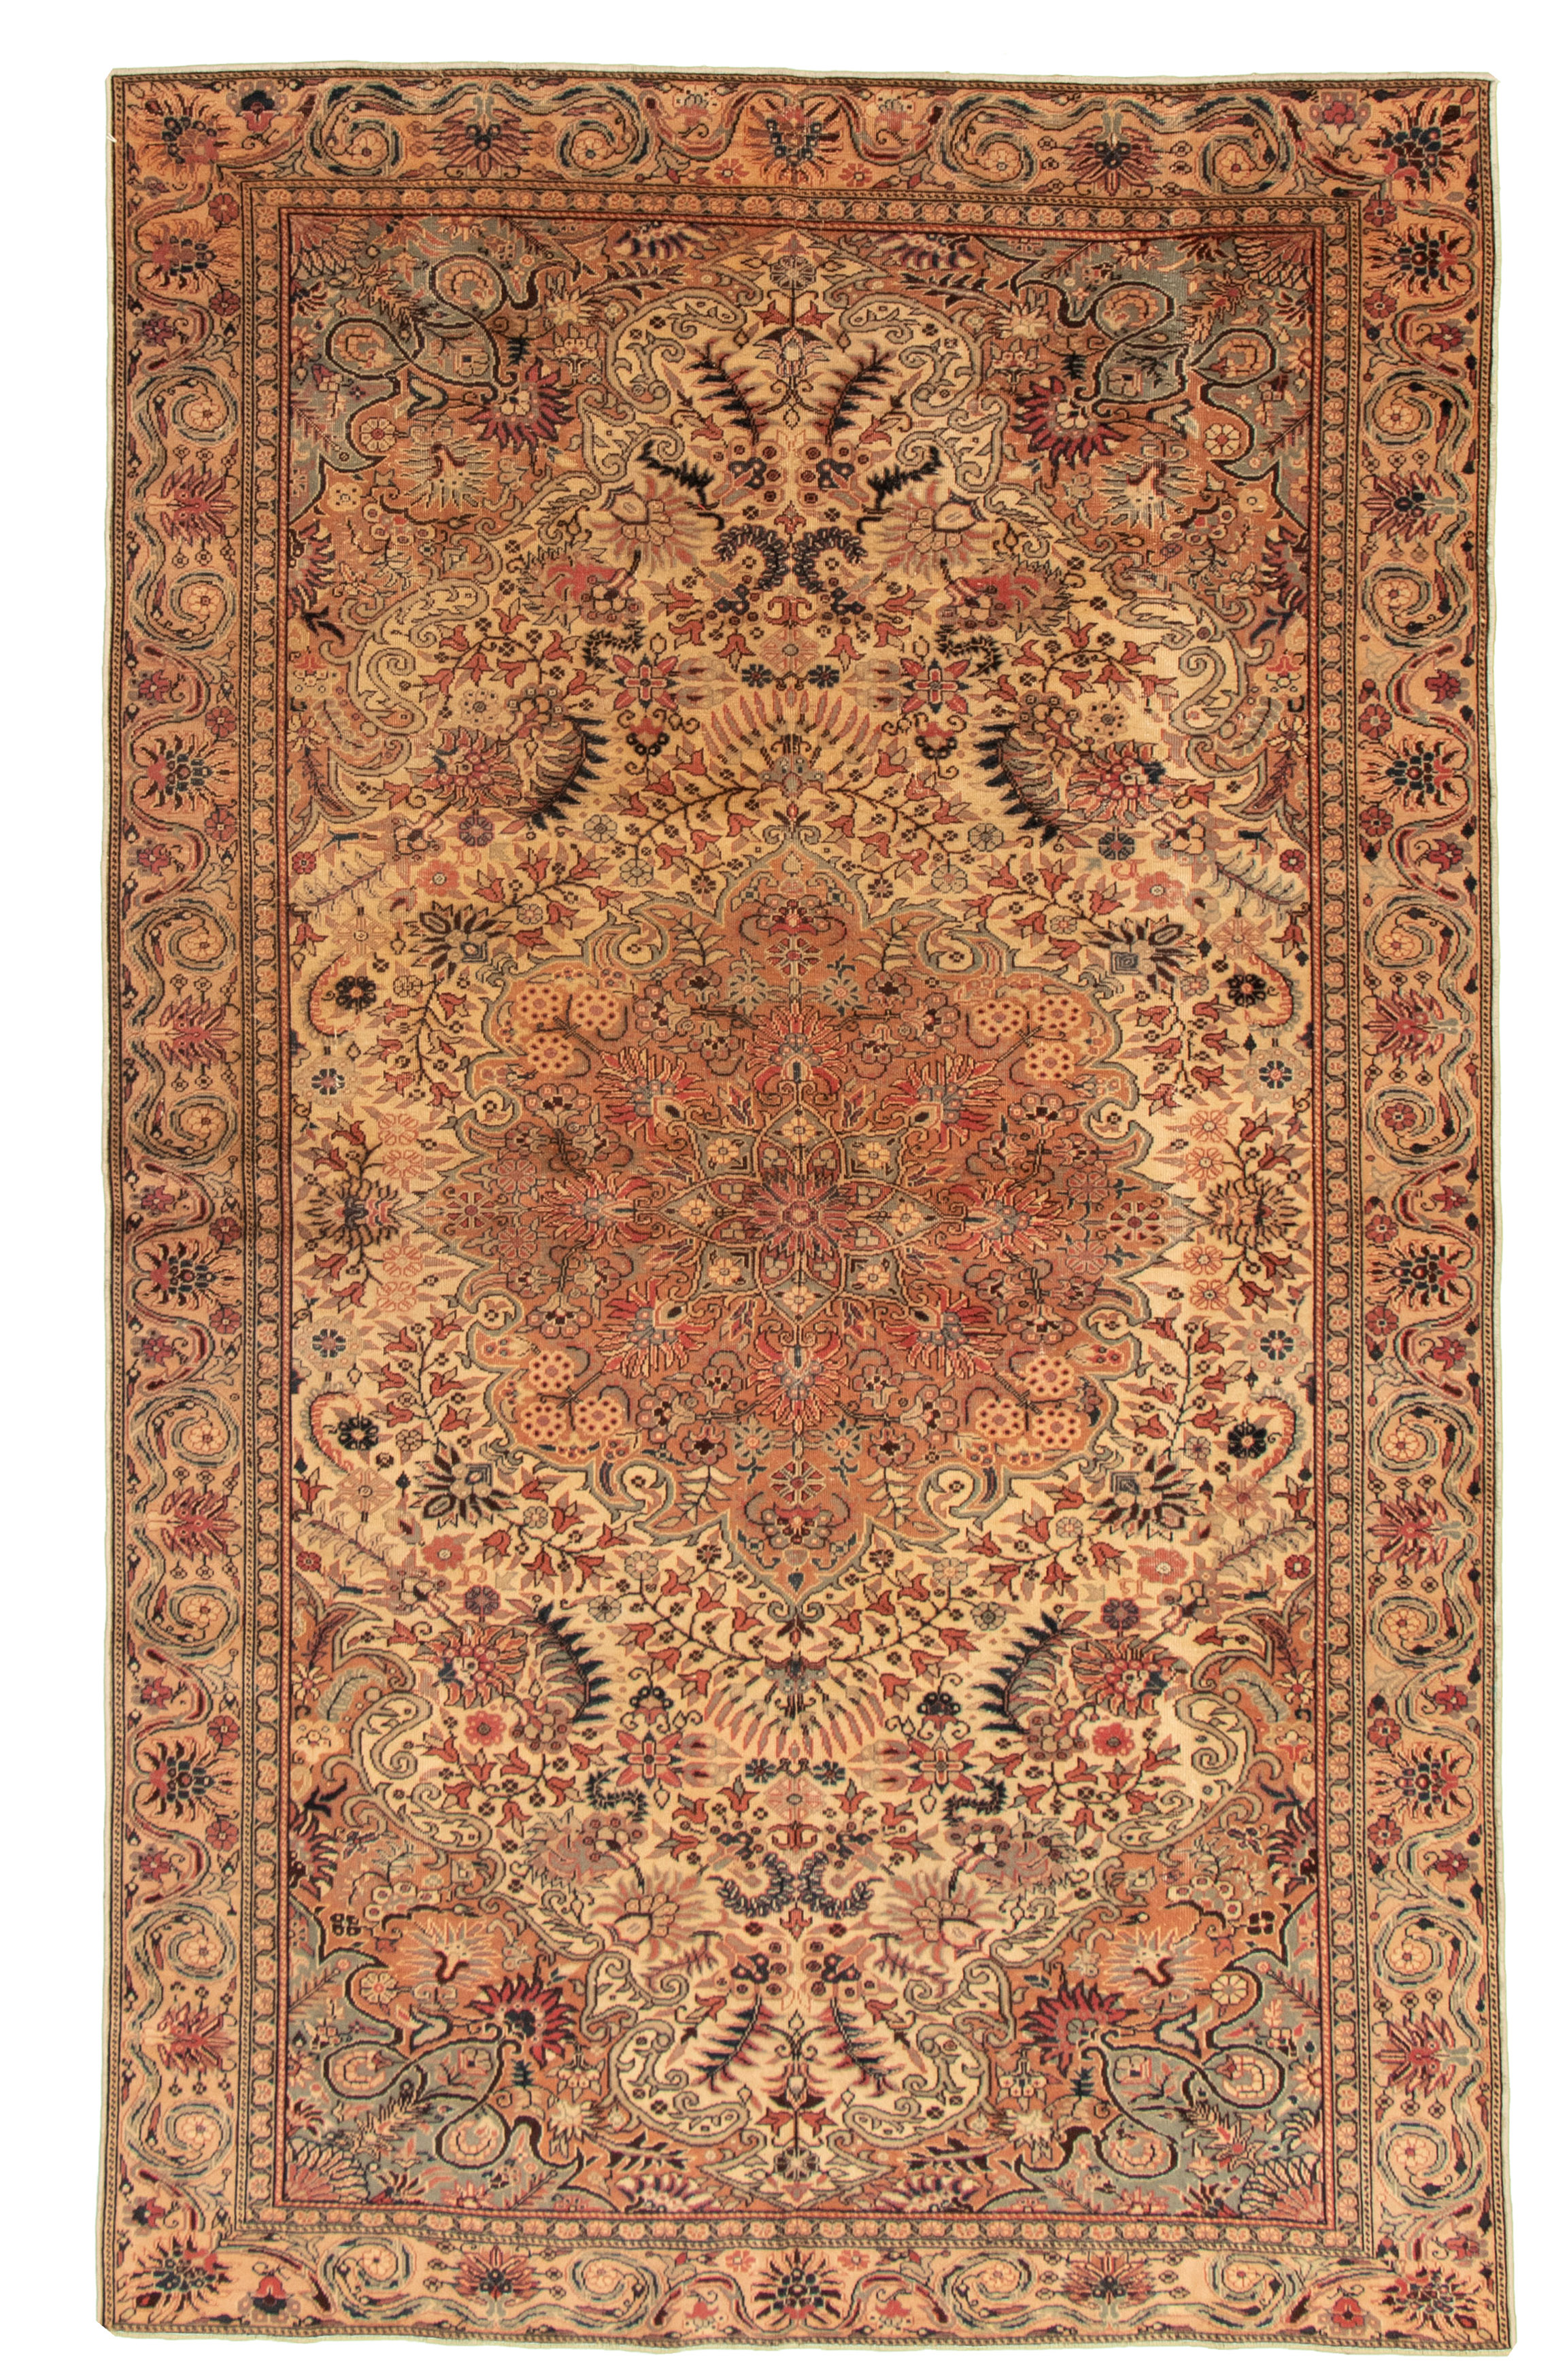 Hand-knotted Keisari Vintage Copper, Cream Wool Rug 5'11" x 9'6" Size: 5'11" x 9'6"  